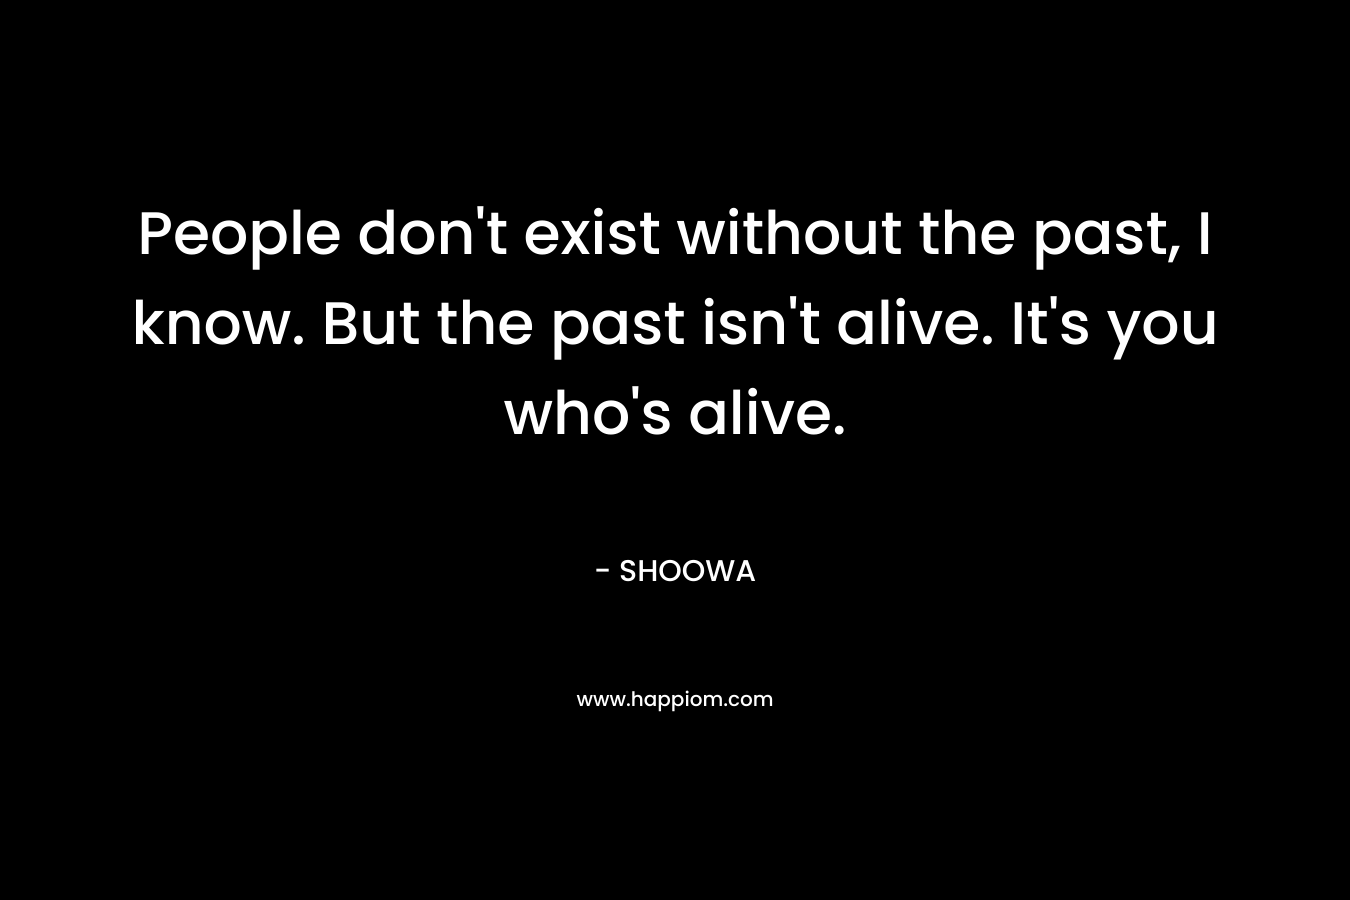 People don't exist without the past, I know. But the past isn't alive. It's you who's alive.